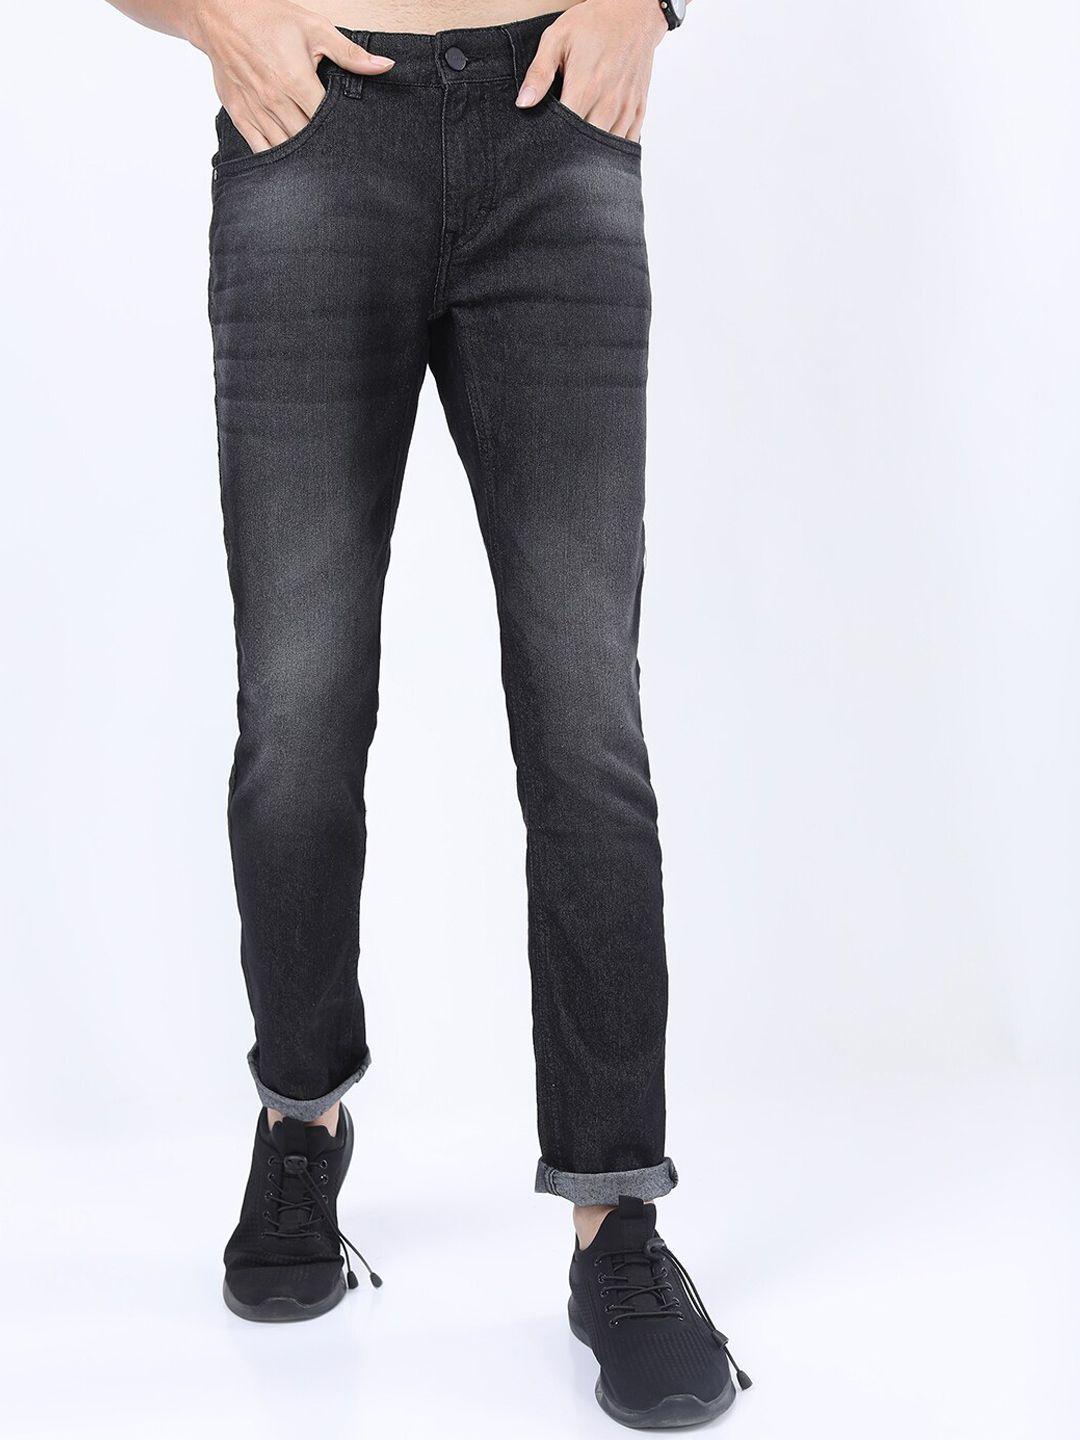 ketch-men-charcoal-slim-fit-light-fade-stretchable-jeans